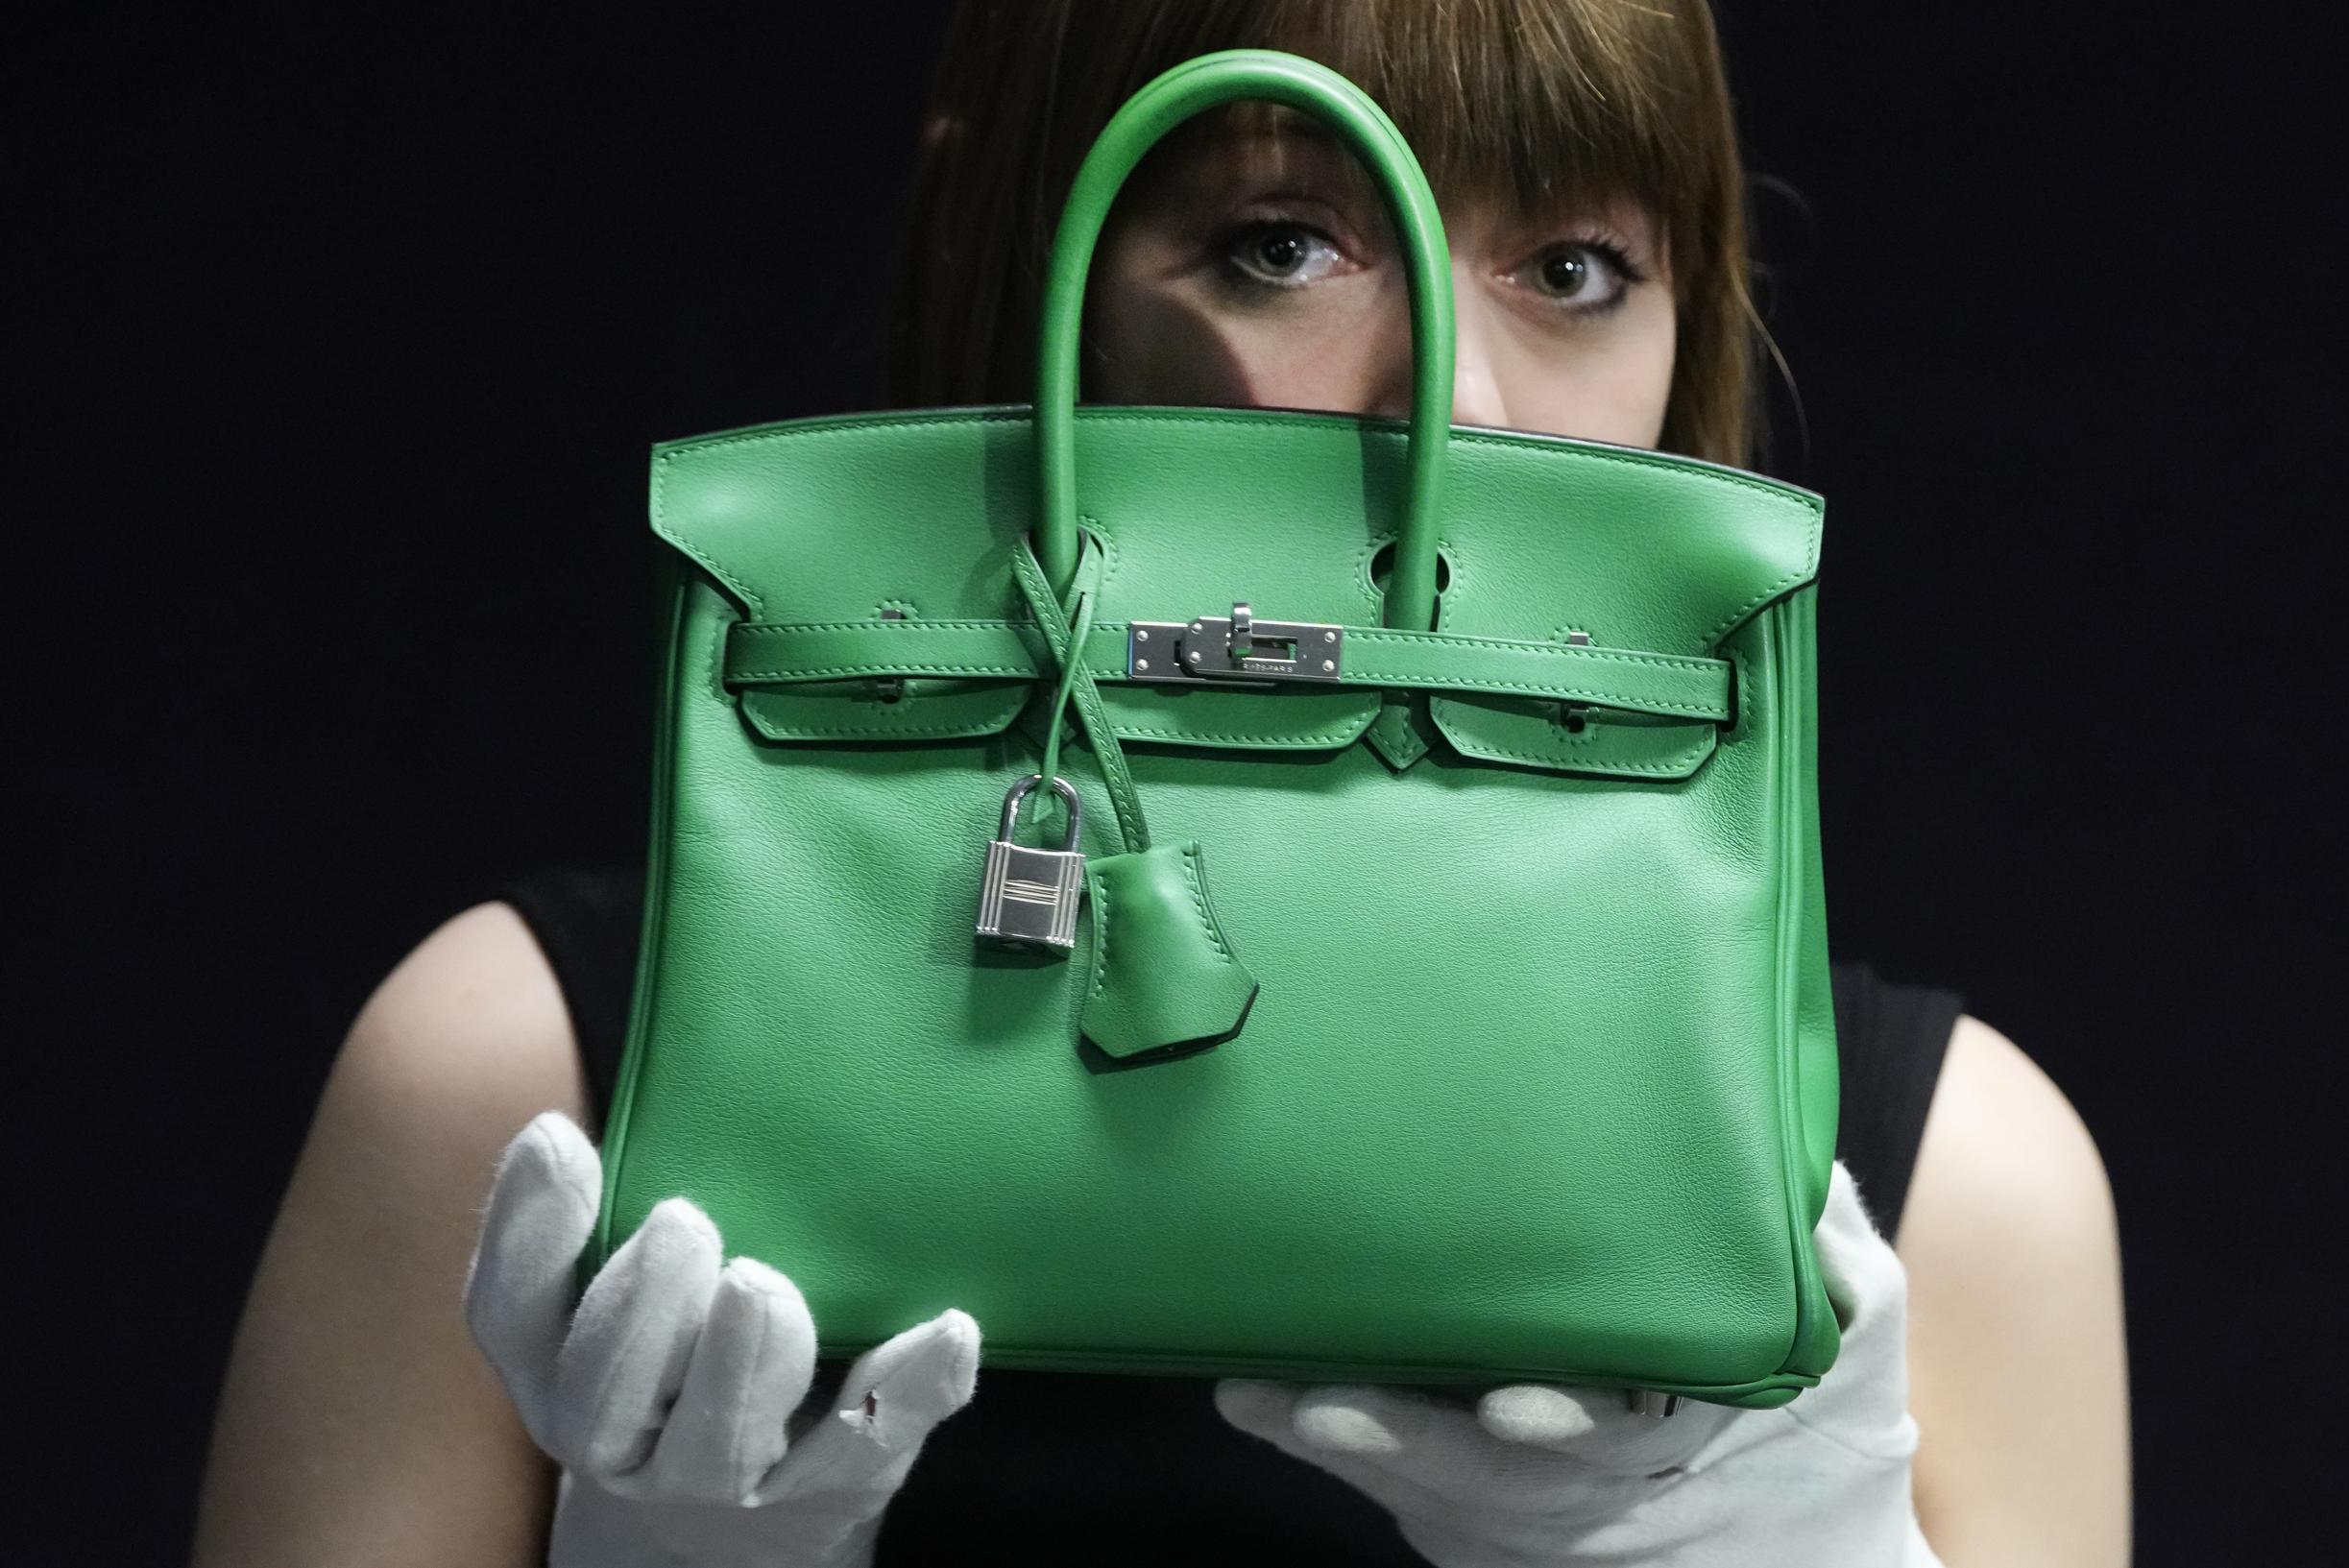 Americans Suing Hermès for Inability to Purchase Birkin Handbags